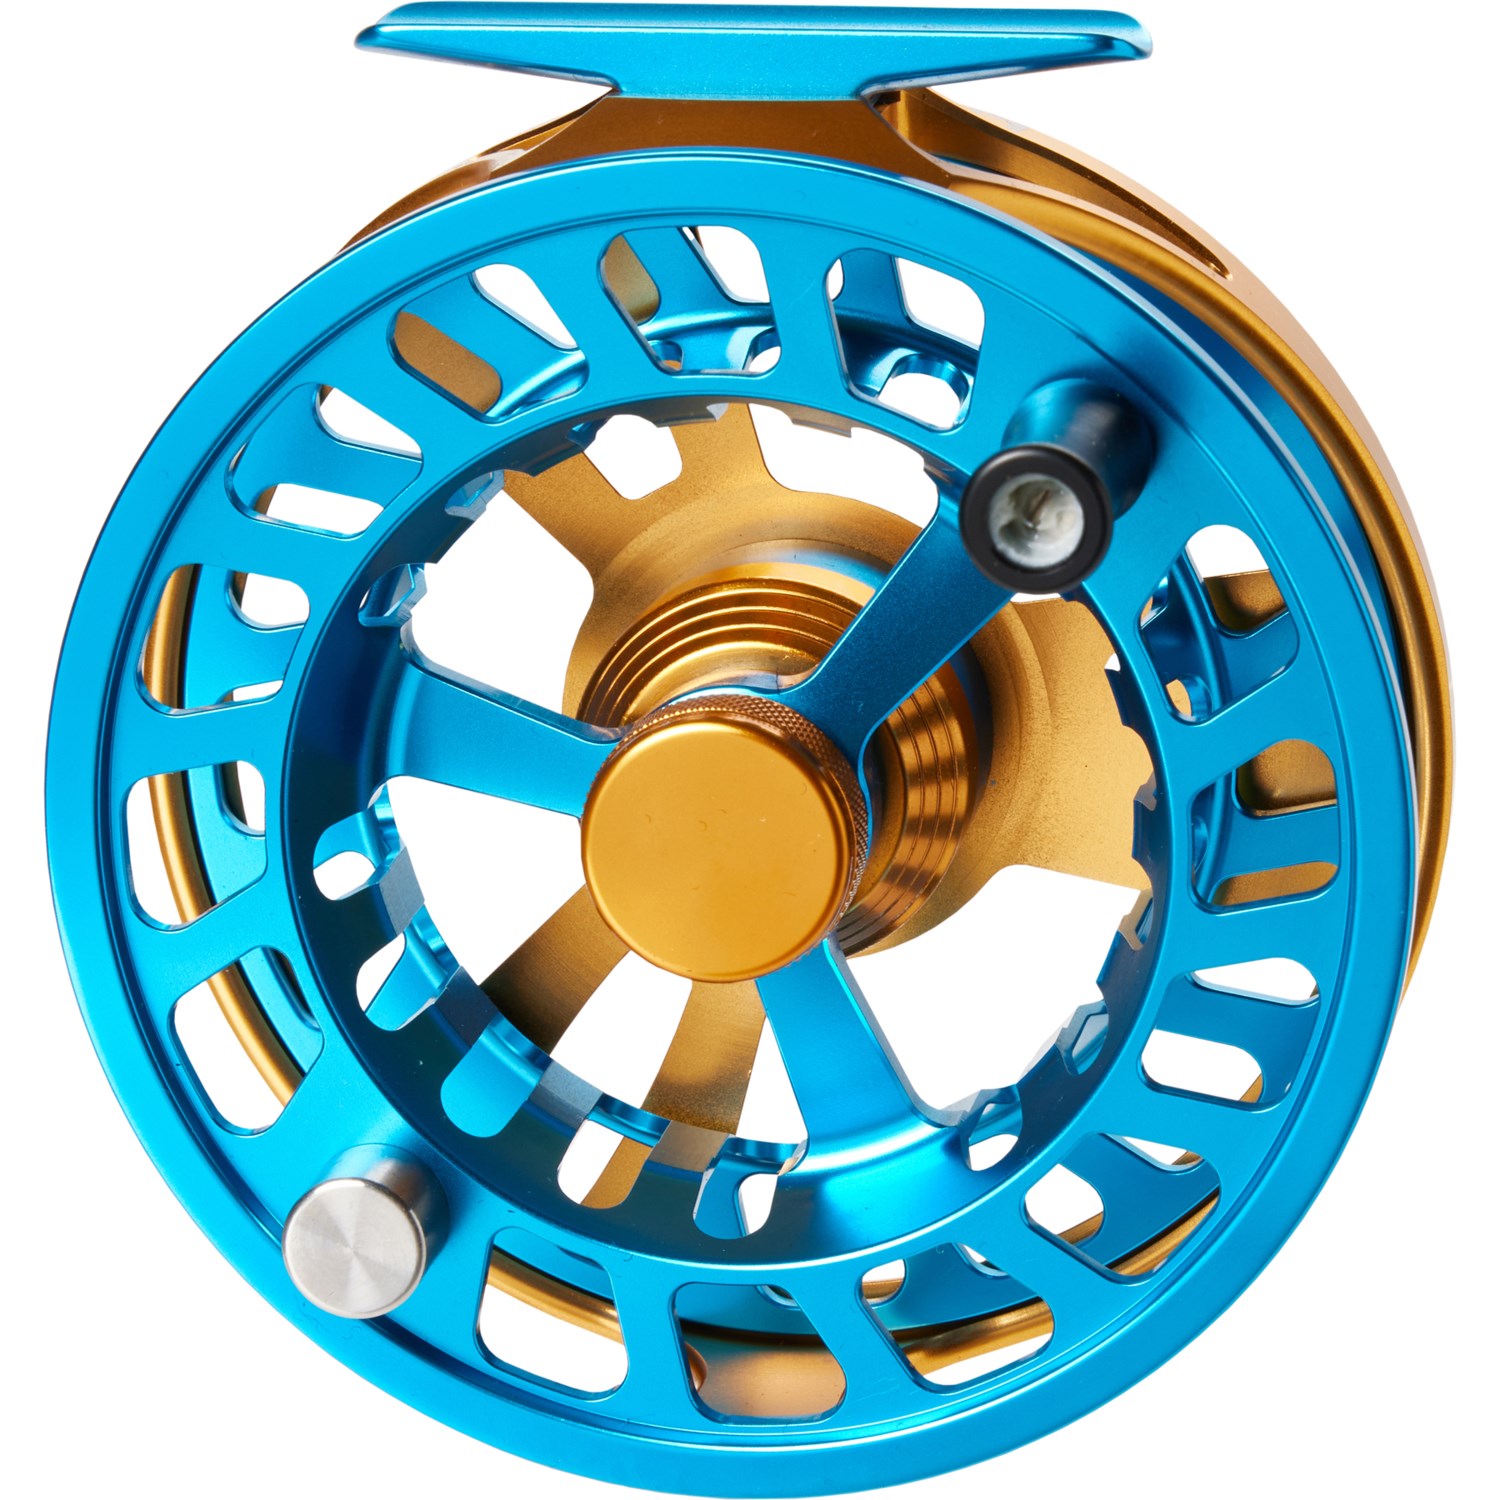 Cheeky Fly Fishing Limitless 425 Saltwater Fly Reel - 7-10wt - Save 42%